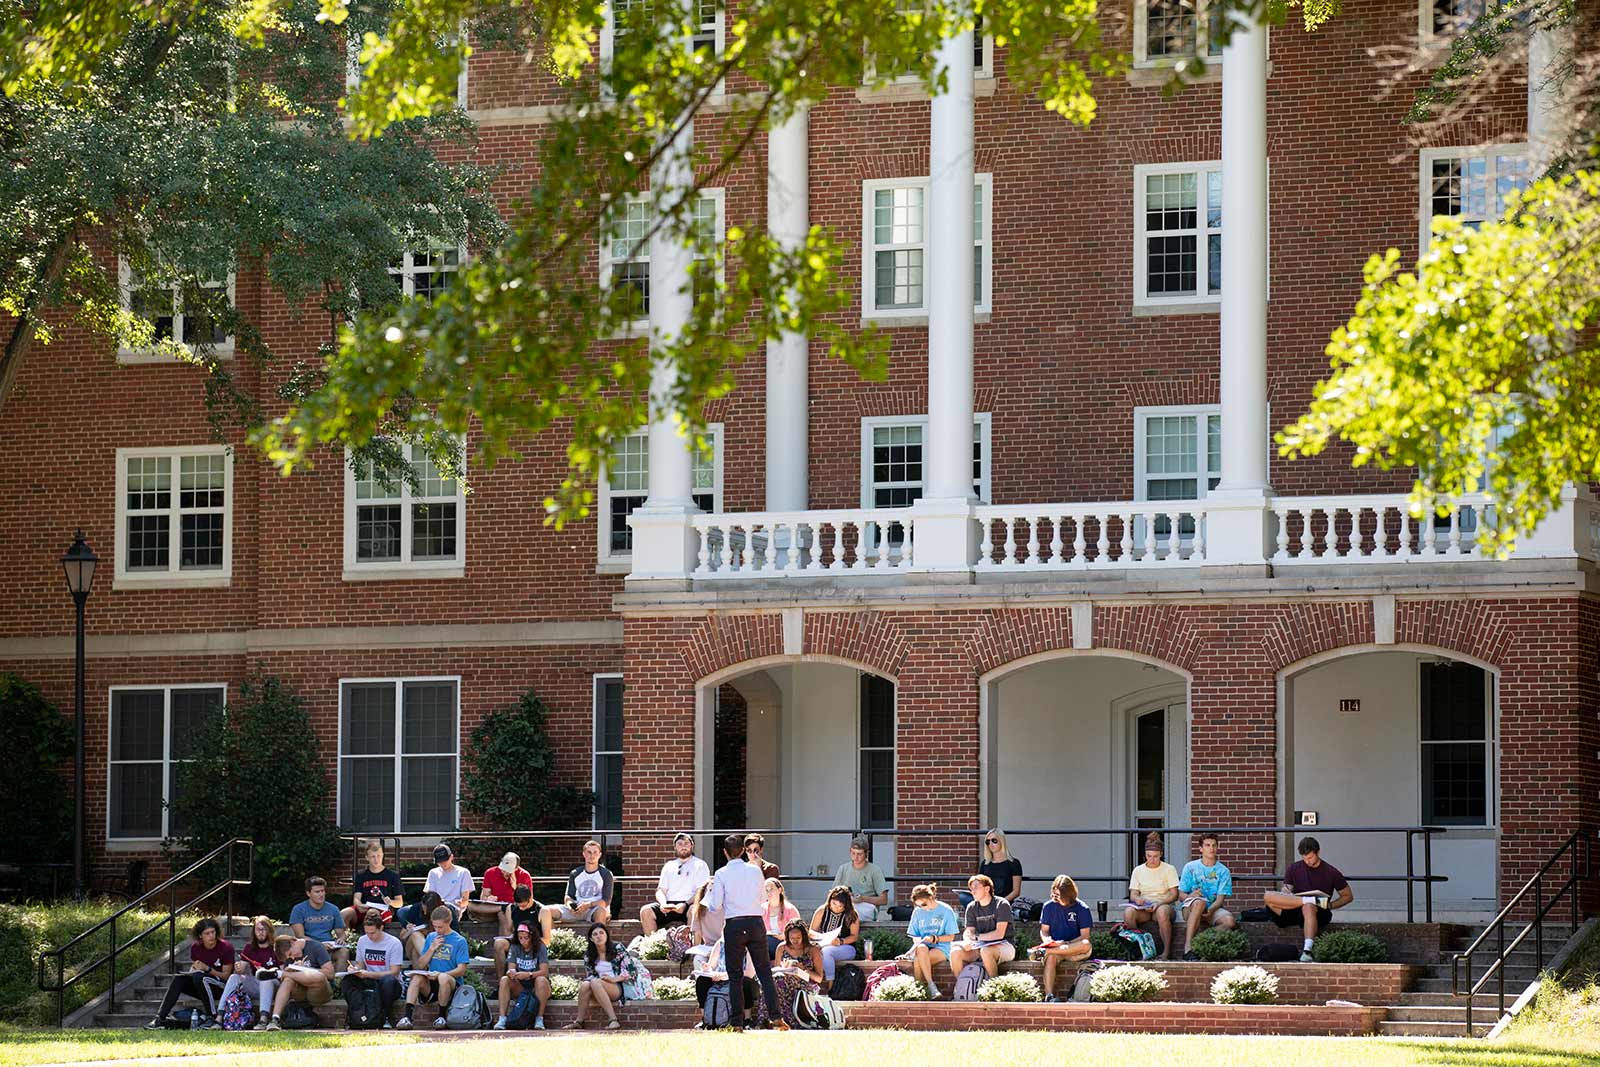 Few faculty members can resist holding classes outside under the giant oaks during perfect spring and fall days.